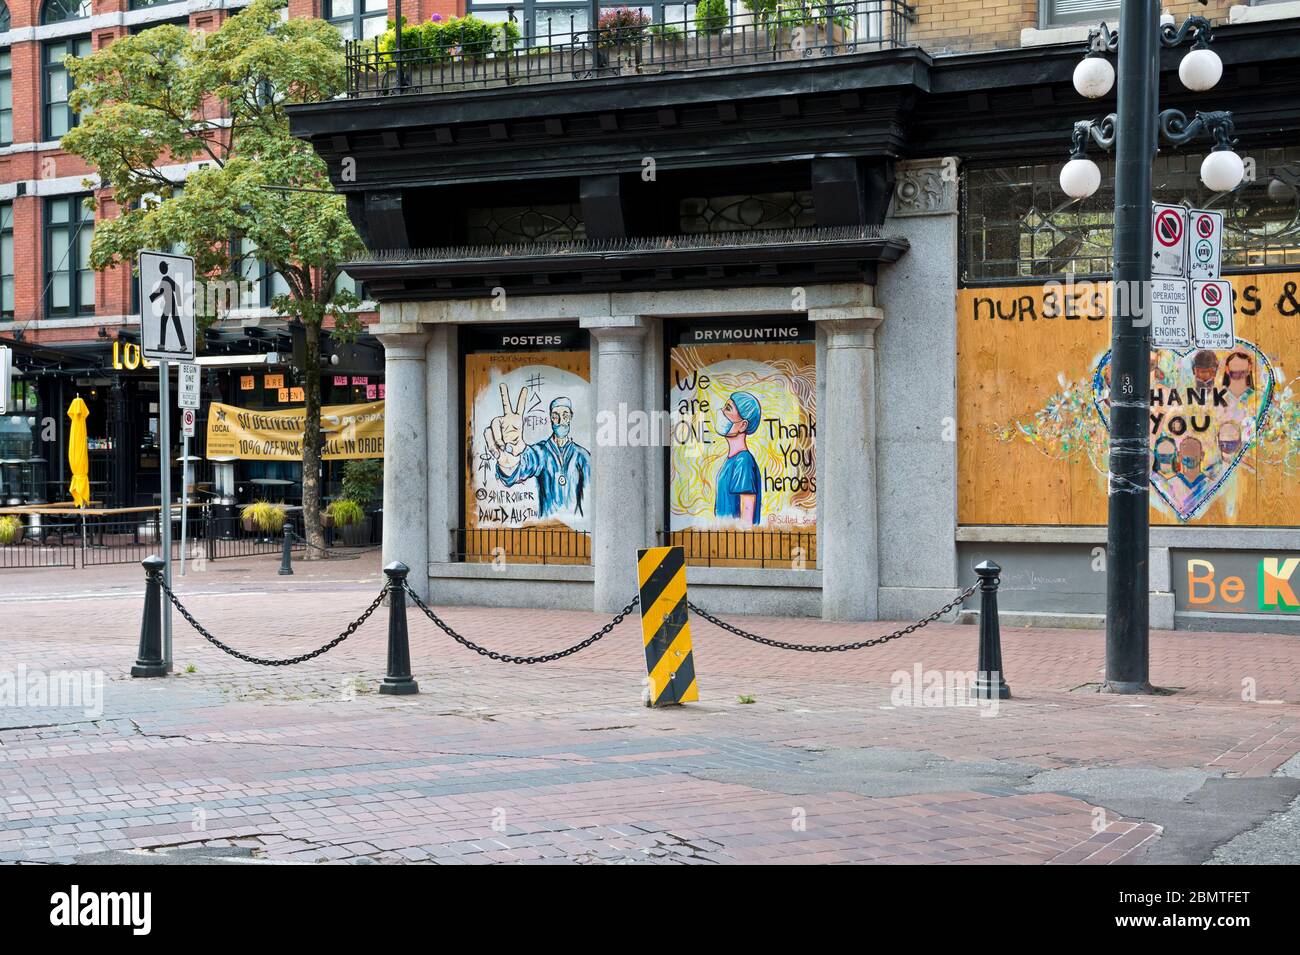 Vancouver, BC, May 9, 2020.  Boarded up shops in Gastown with painted messages of thanks to healthcare workers during the Covid 19 pandemic. Stock Photo